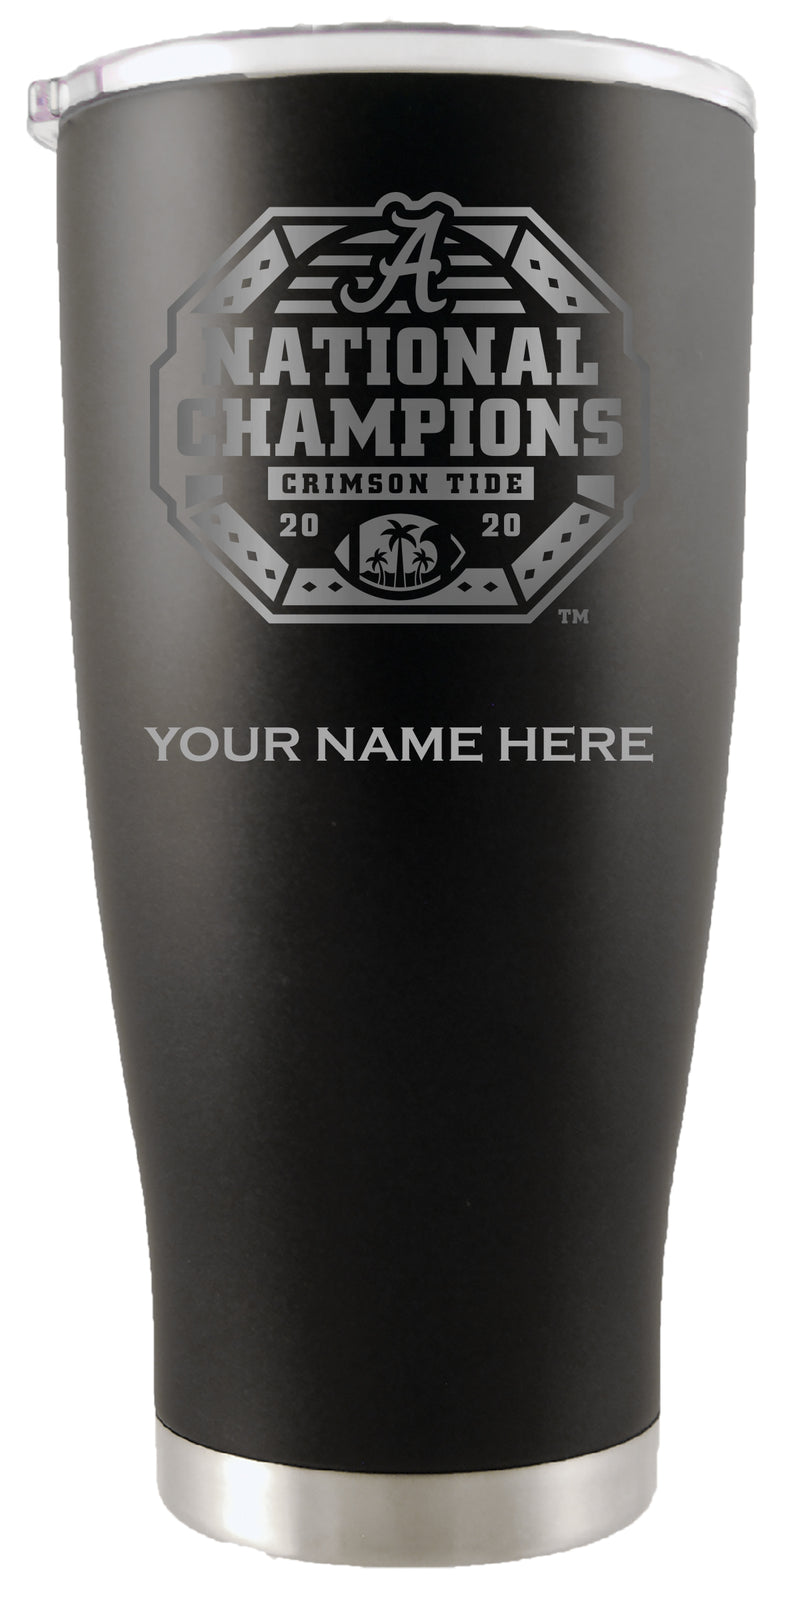 2020 NCAA Champs Personalized 20oz Black Stainless Steel Tumbler - Alabama
AL, COL, engraving, OldProduct, Personalized_Personalized
The Memory Company